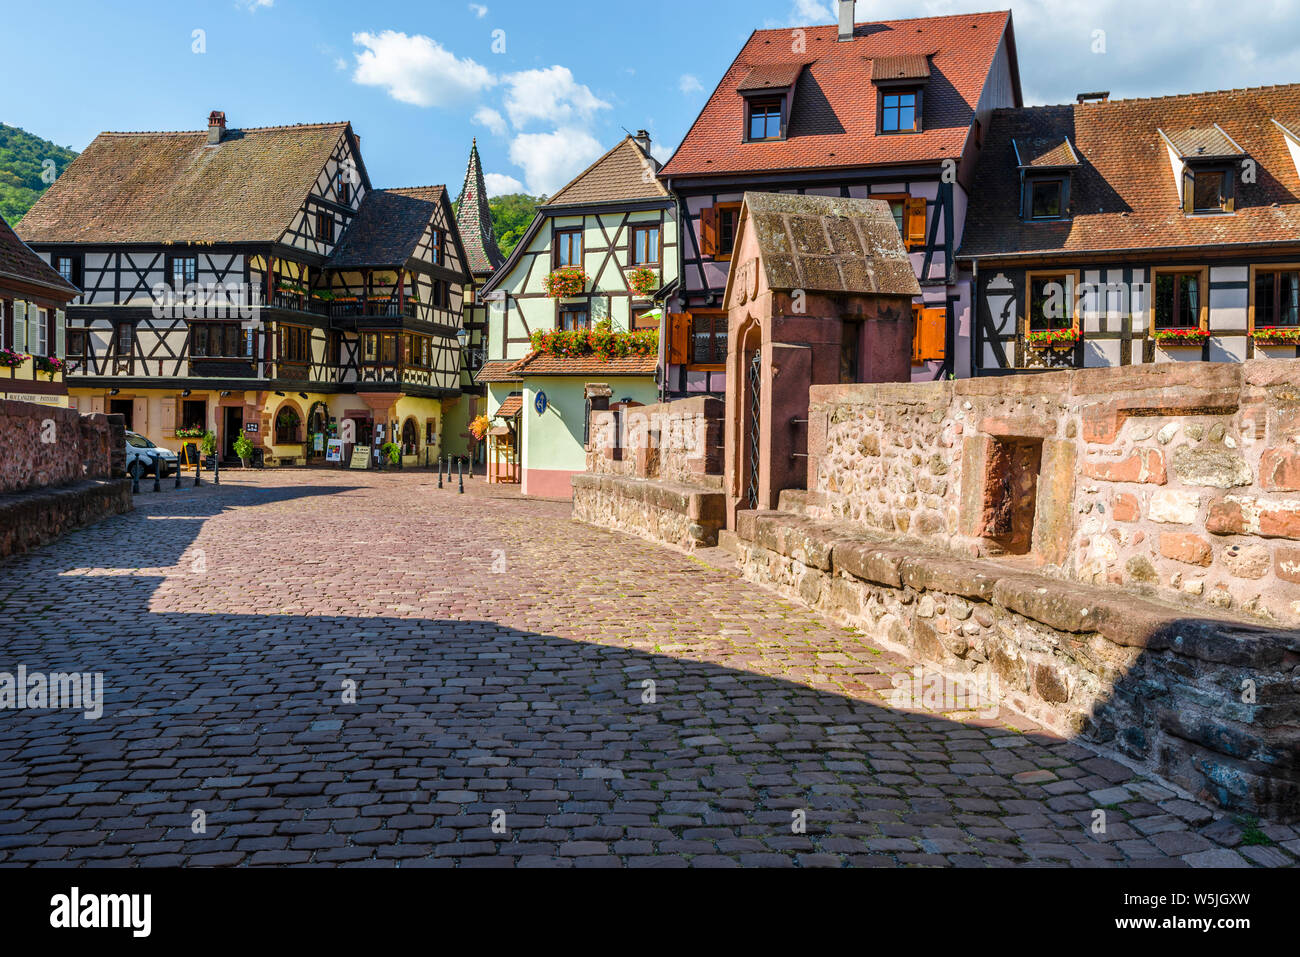 scenic old town in the center of Kaysersberg, Alsace, France, old town with colorful half-timbered houses and stone bridge Stock Photo